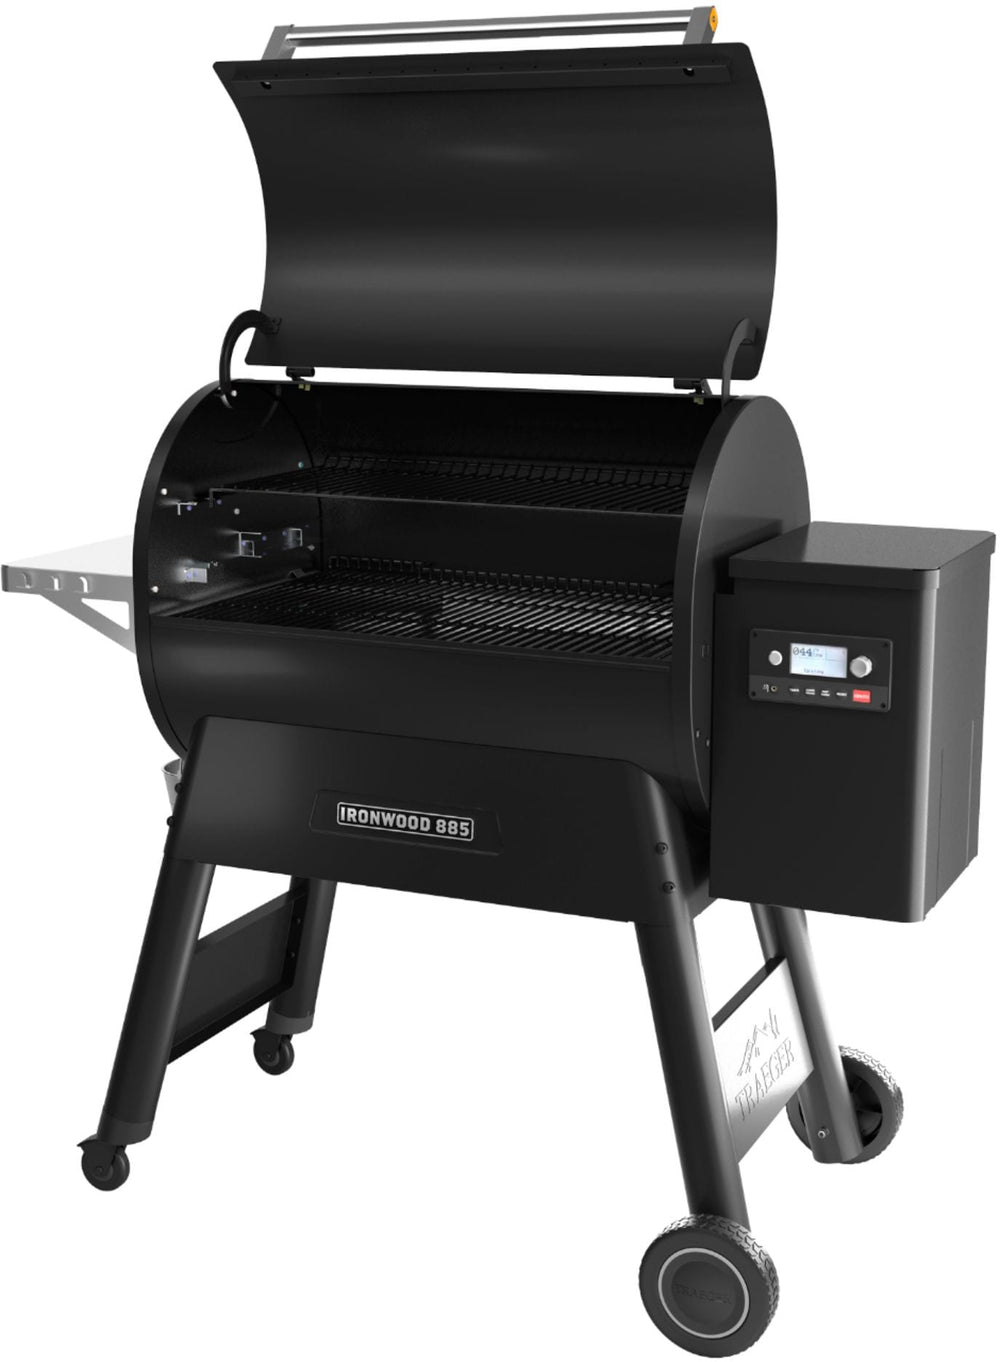 Traeger Grills - Ironwood 885 with WiFIRE - Black_1